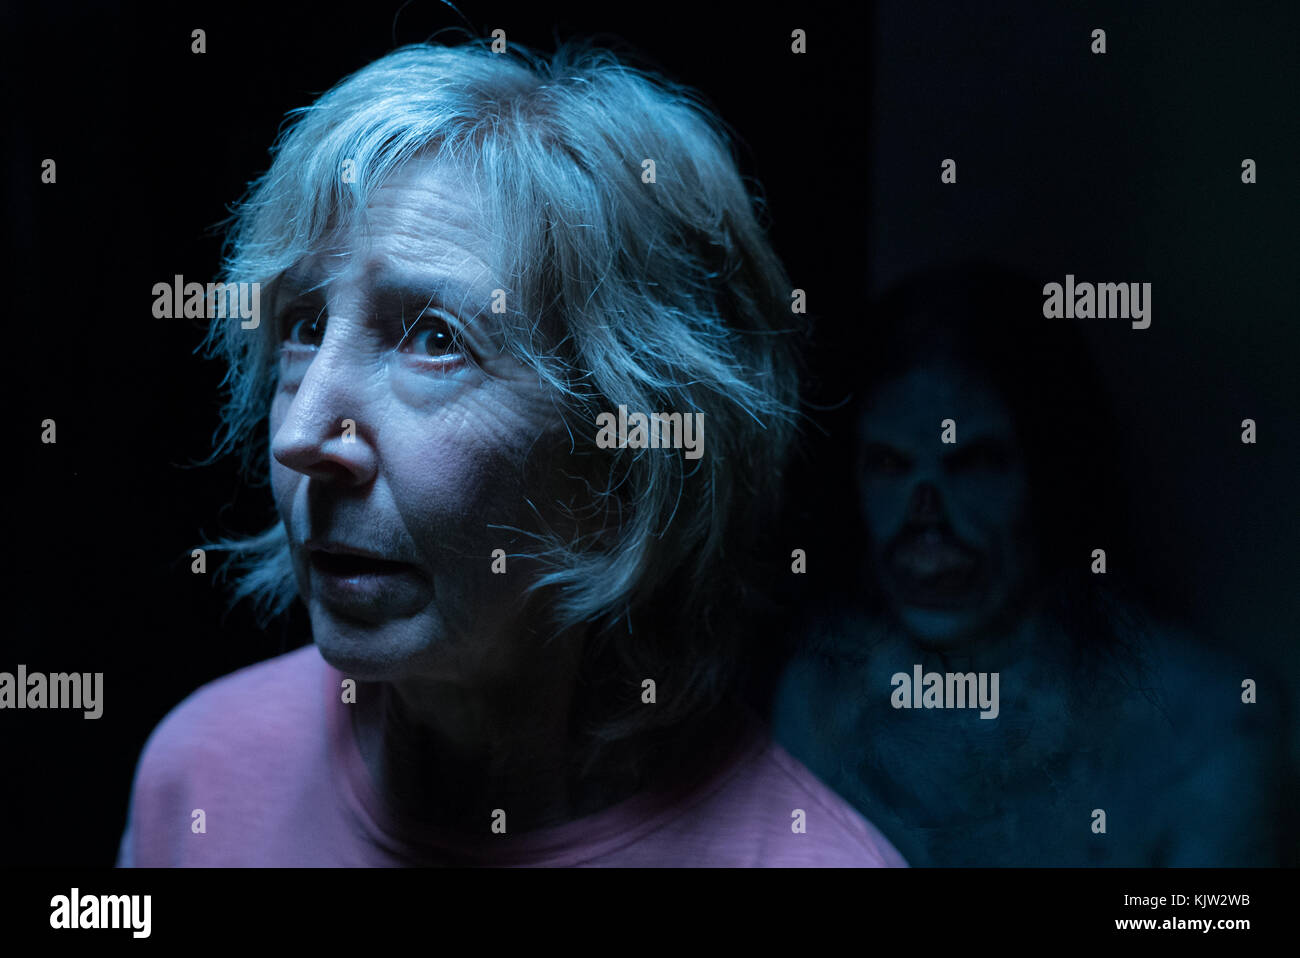 RELEASE DATE: January 5, 2018 TITLE: Insidious: The Last Key STUDIO: Universal Pictures DIRECTOR: Adam Robitel PLOT: Parapsychologist Dr. Elise Rainier faces her most fearsome and personal haunting yet, in her own family home. STARRING: LIN SHAYE as Elise Rainier. (Credit Image: © Universal Pictures/Entertainment Pictures) Stock Photo